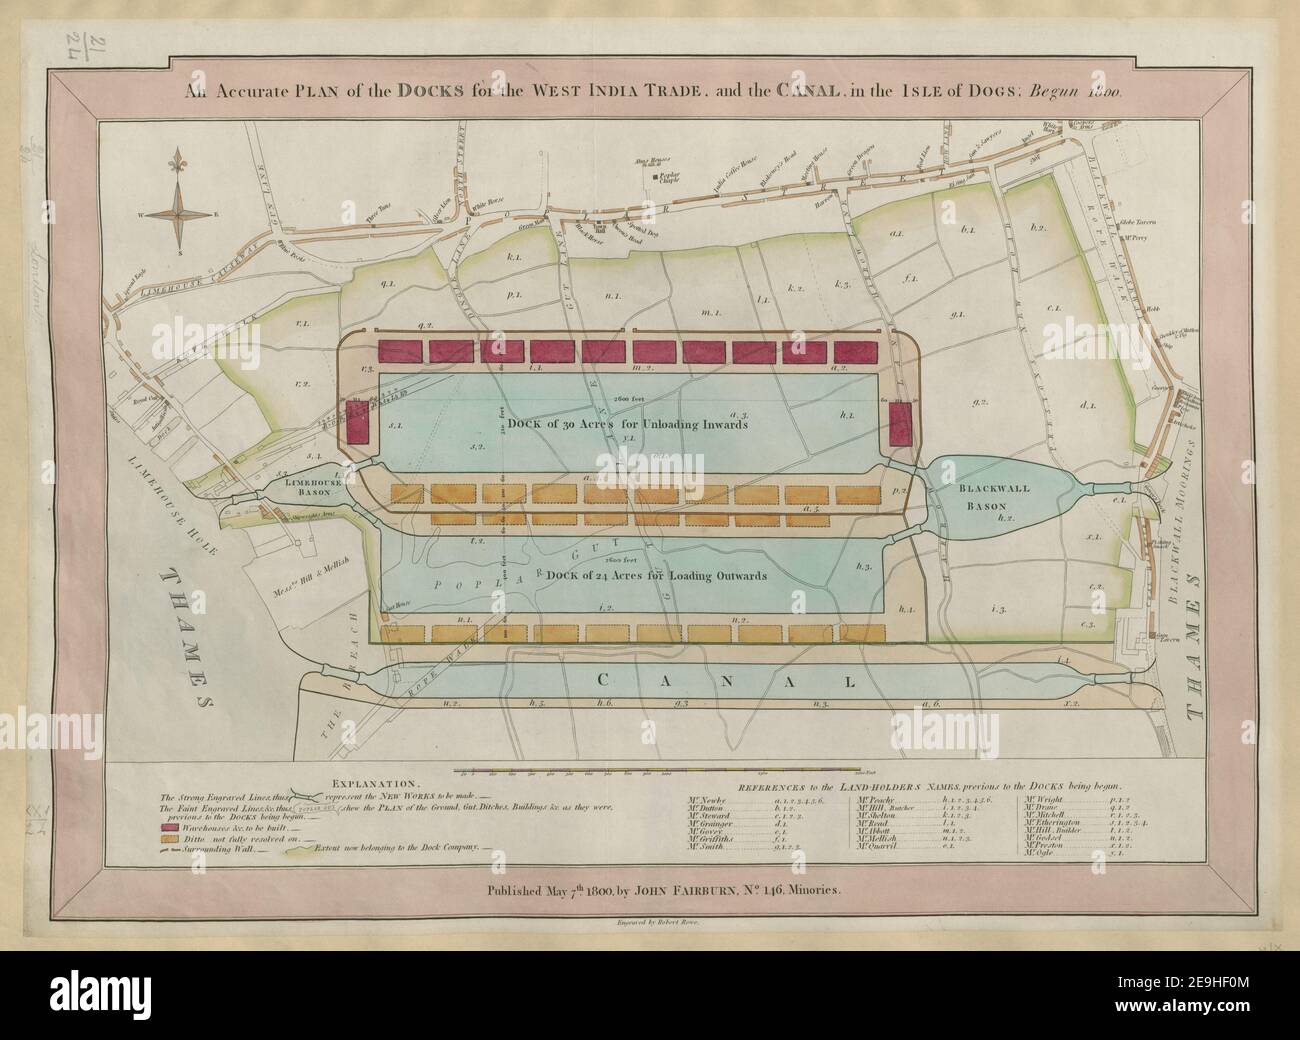 A Correct PLAN of the LONDON DOCKS, shewing the HOUSES & other PREMISES, within the LIMITS granted by Act of Parliament, 1800  .  Author  Fairburn, John 21.24. Place of publication: [London] Publisher: Published May 7.th 1800, by JOHN FAIRBURN, No. 146, Minories., Date of publication: [1800]  Item type: 1 map Medium: copperplate engraving with hand colouring Dimensions: 36.3 x 53.2 cm  Former owner: George III, King of Great Britain, 1738-1820 Stock Photo